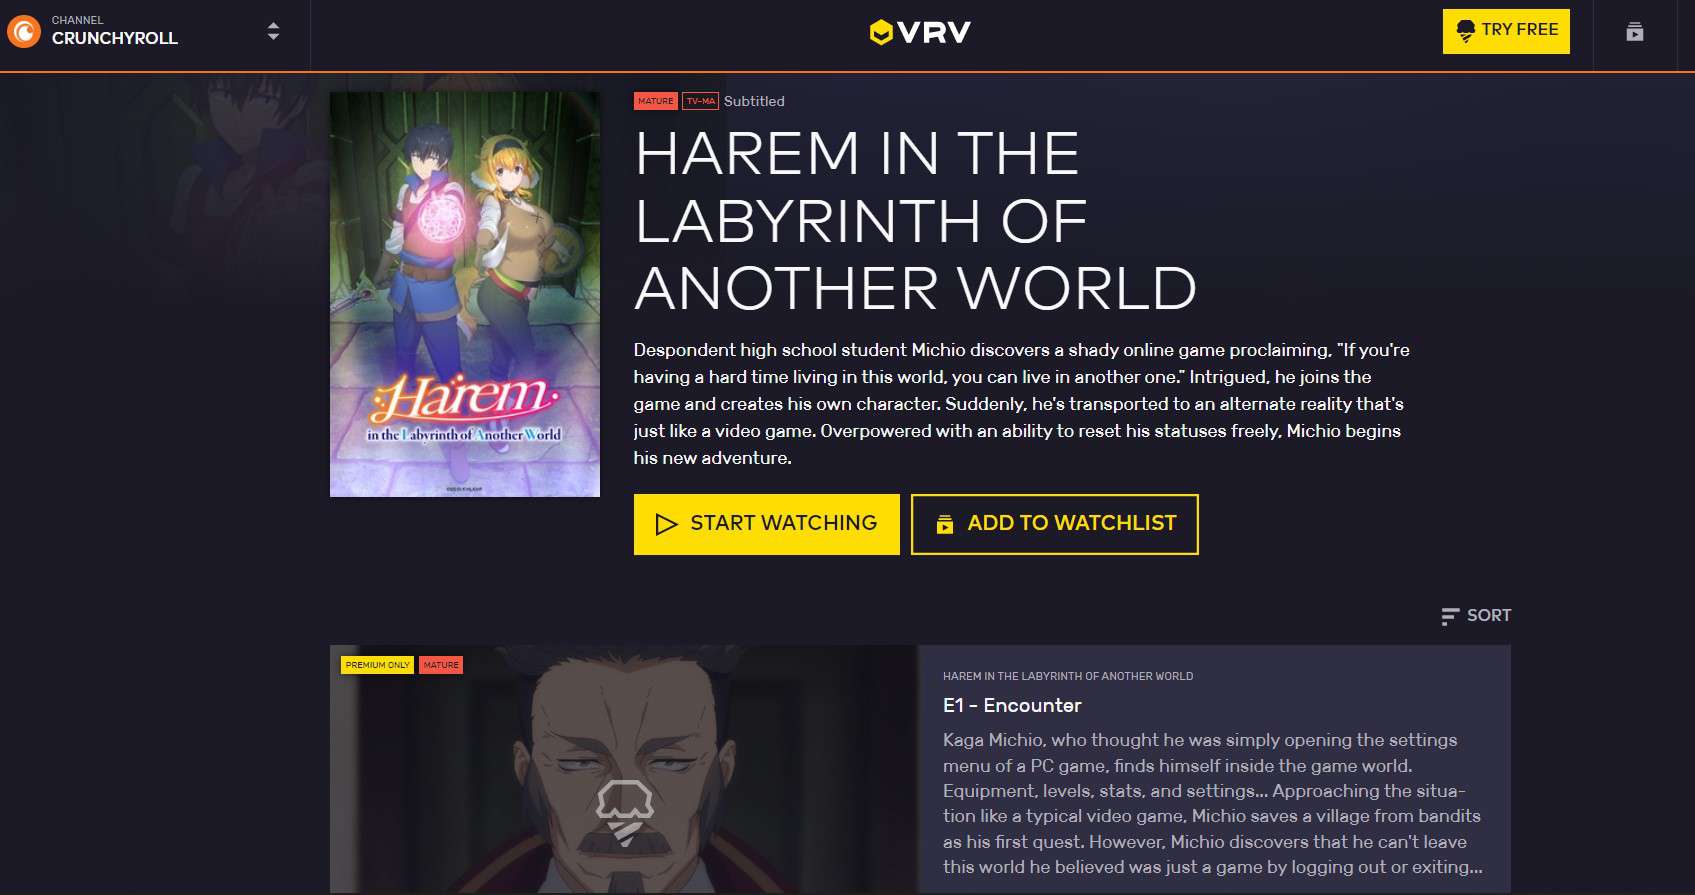 watch Harem in the Labyrinth of Another World on Crunchyroll